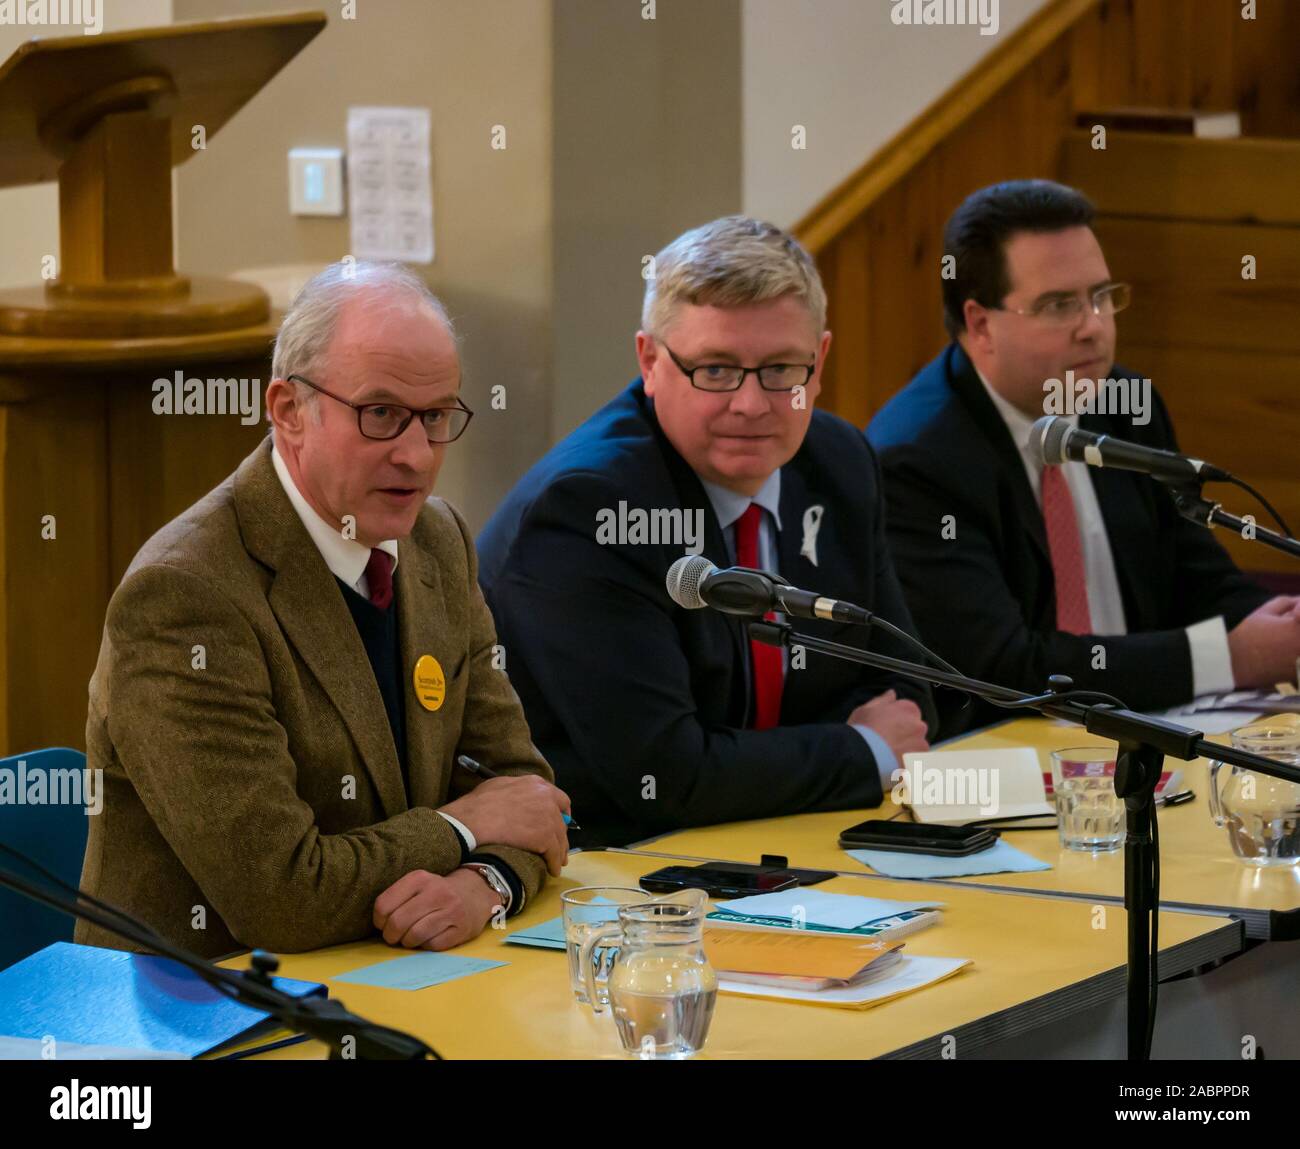 North Berwick, East Lothian, Scotland, United Kingdom, 28 November 2019. General Election: First hustings for candidates seeking election as MP for East Lothian with questions from the audience ranging from Defence to Honesty. Pictured (L to R): Robert O'Riordan, Scottish Liberal Democrats candidate, sitting MP Martin Whitfield, Scottish Labour Party candidate, Haddington and Lammermuir ward councillor Craig Hoy, Scottish Conservative & Unionist Party candidate Stock Photo